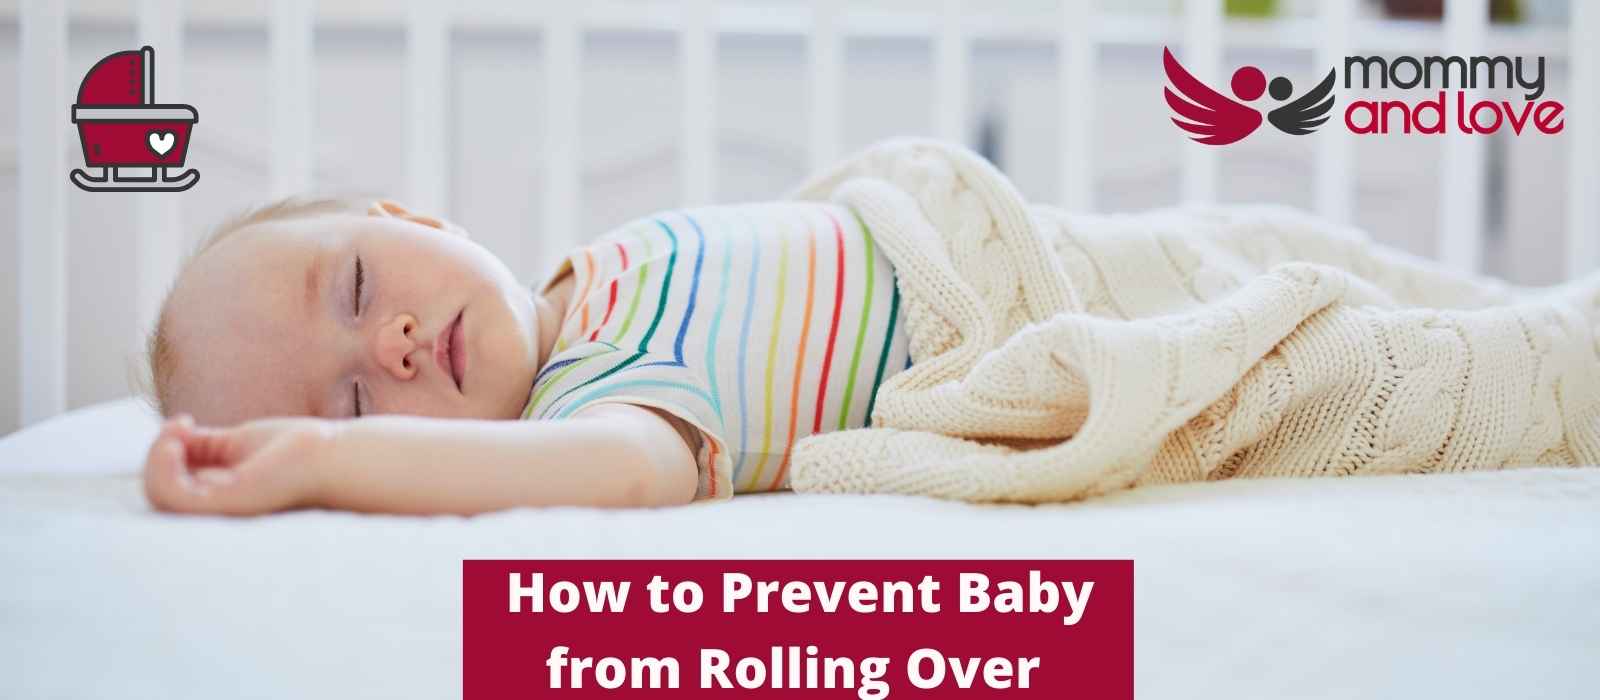 How to Prevent Baby from Rolling Over in Crib